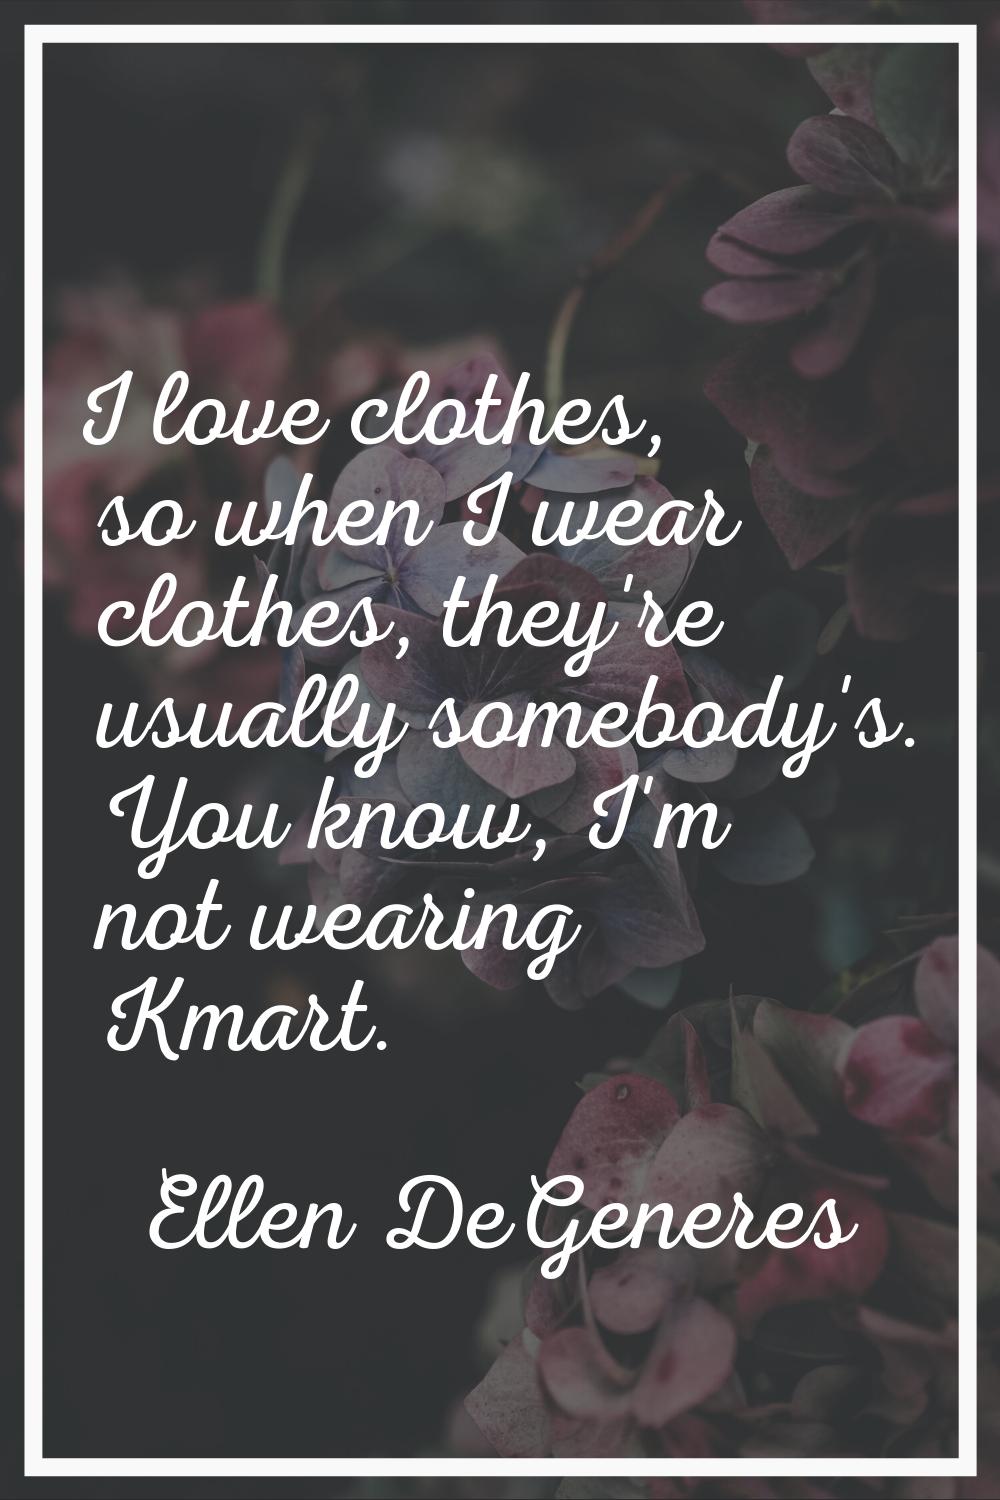 I love clothes, so when I wear clothes, they're usually somebody's. You know, I'm not wearing Kmart